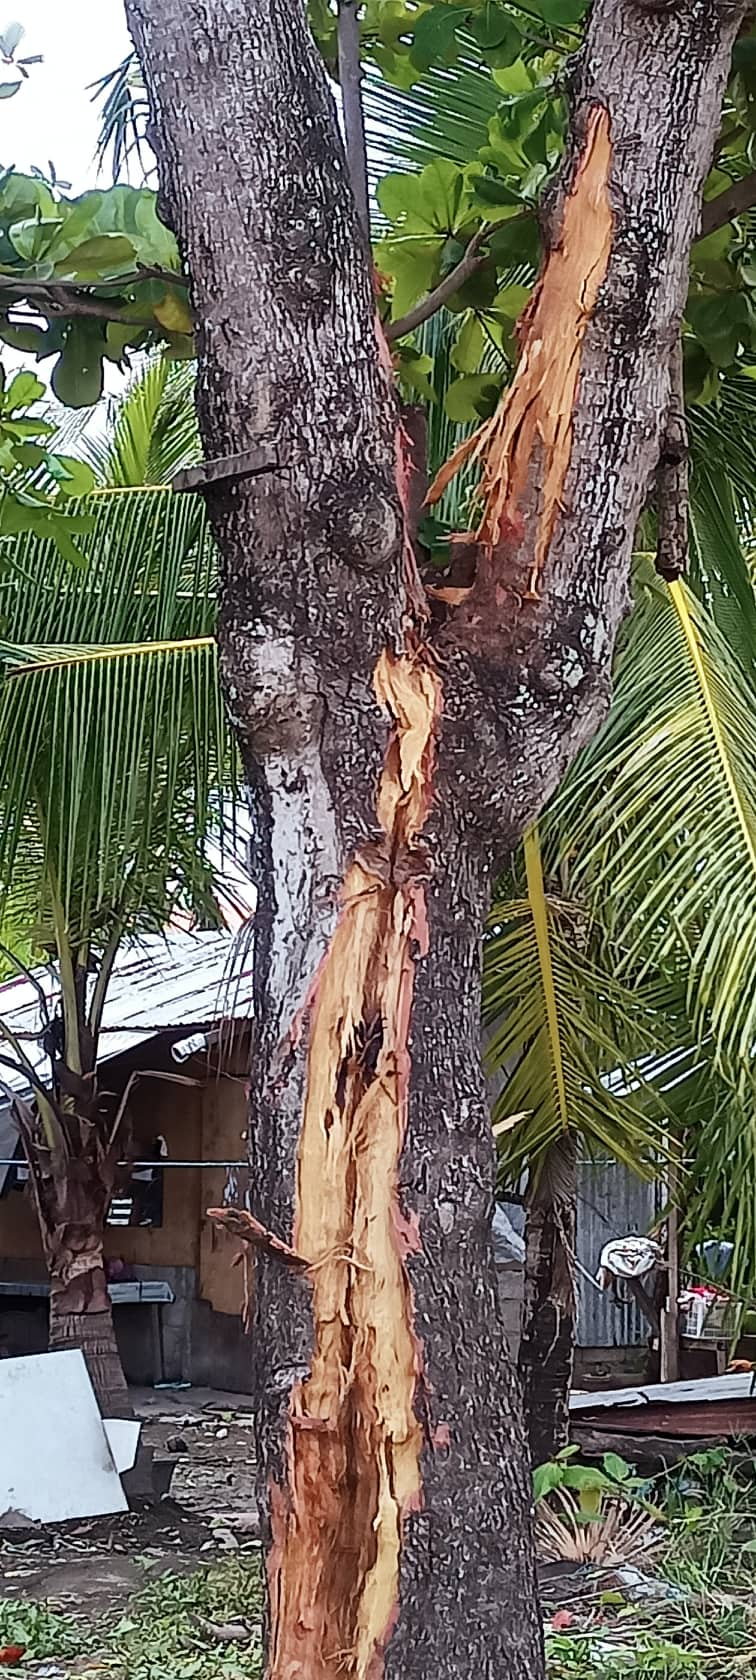 A tree in Talisay City is nearly split in half after it was hit by lightning at noon on Thursday, Sept. 29. The lightning strike that hit the tree also threw the children nearby causing them to suffer cuts and bruises. | Yel Rivera via Paul Lauro